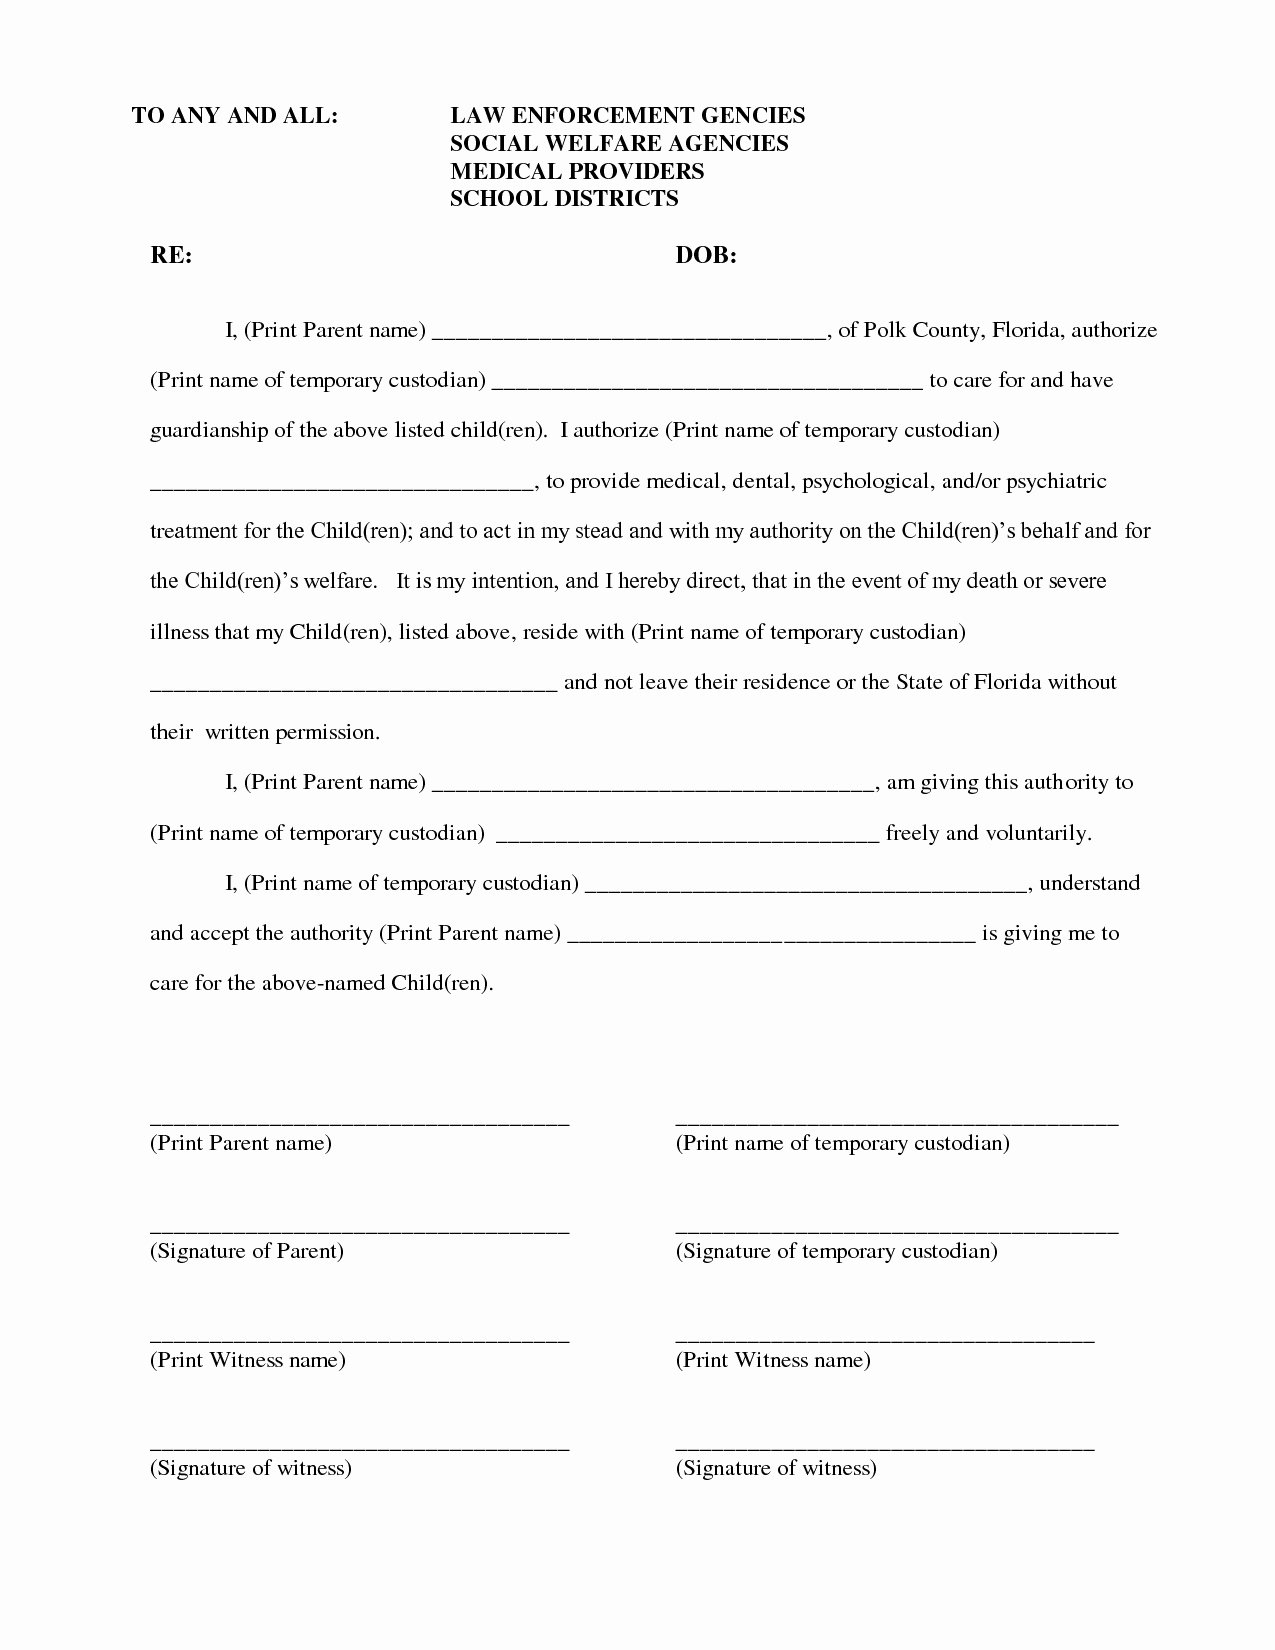 Free Printable Child Guardianship forms Awesome Temporary Child Custody Agreement form Quick Best S